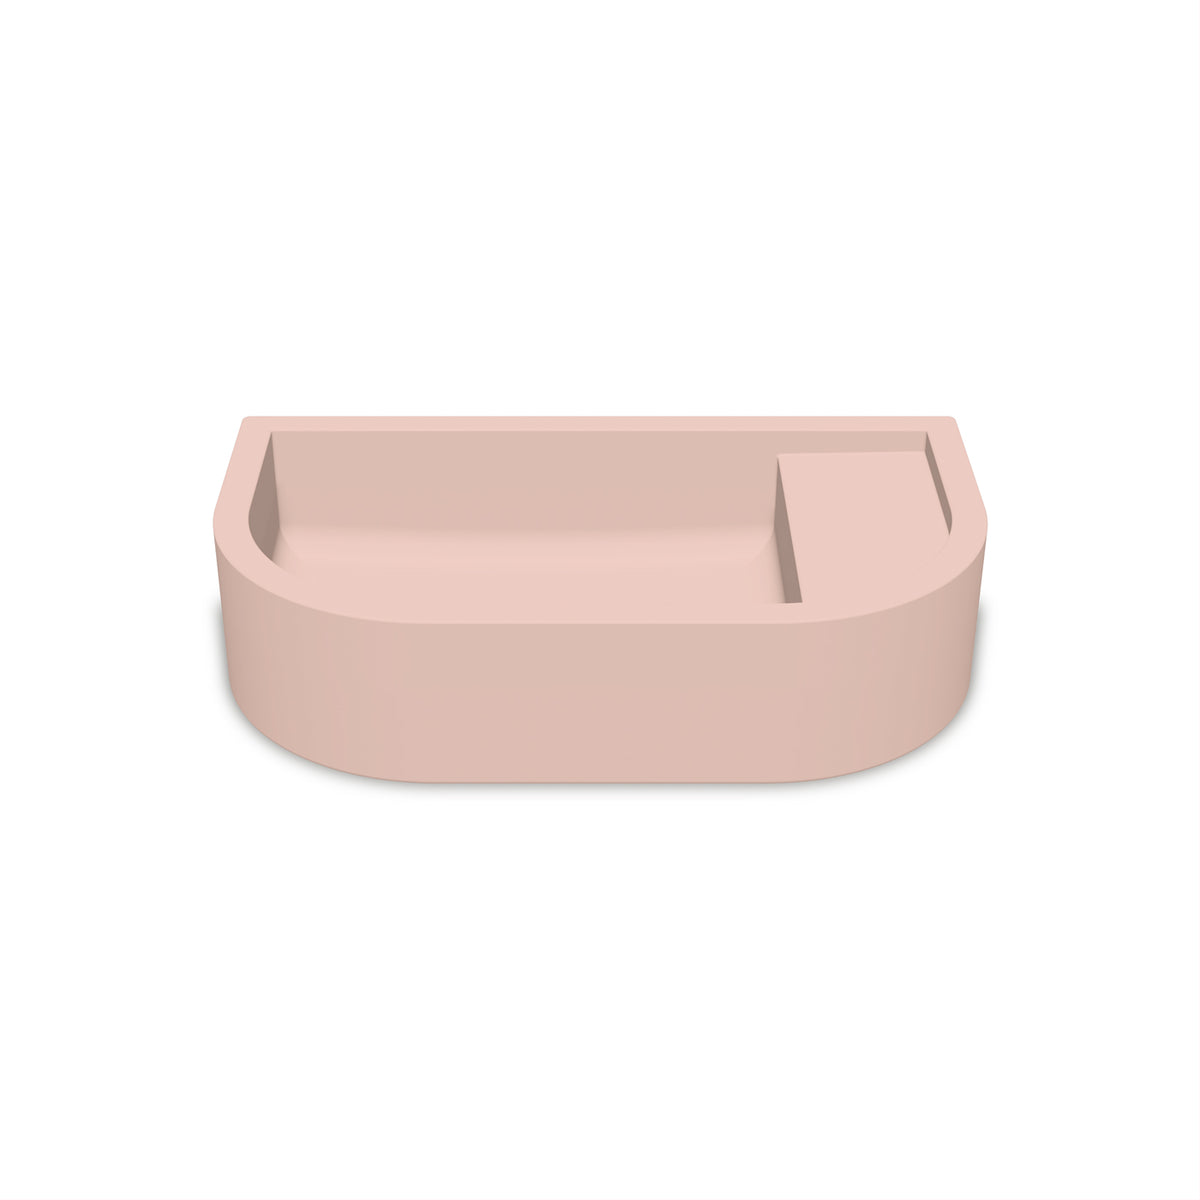 Loop 02 Basin - Overflow - Wall Hung (Blush Pink,No Tap Hole,Brass)